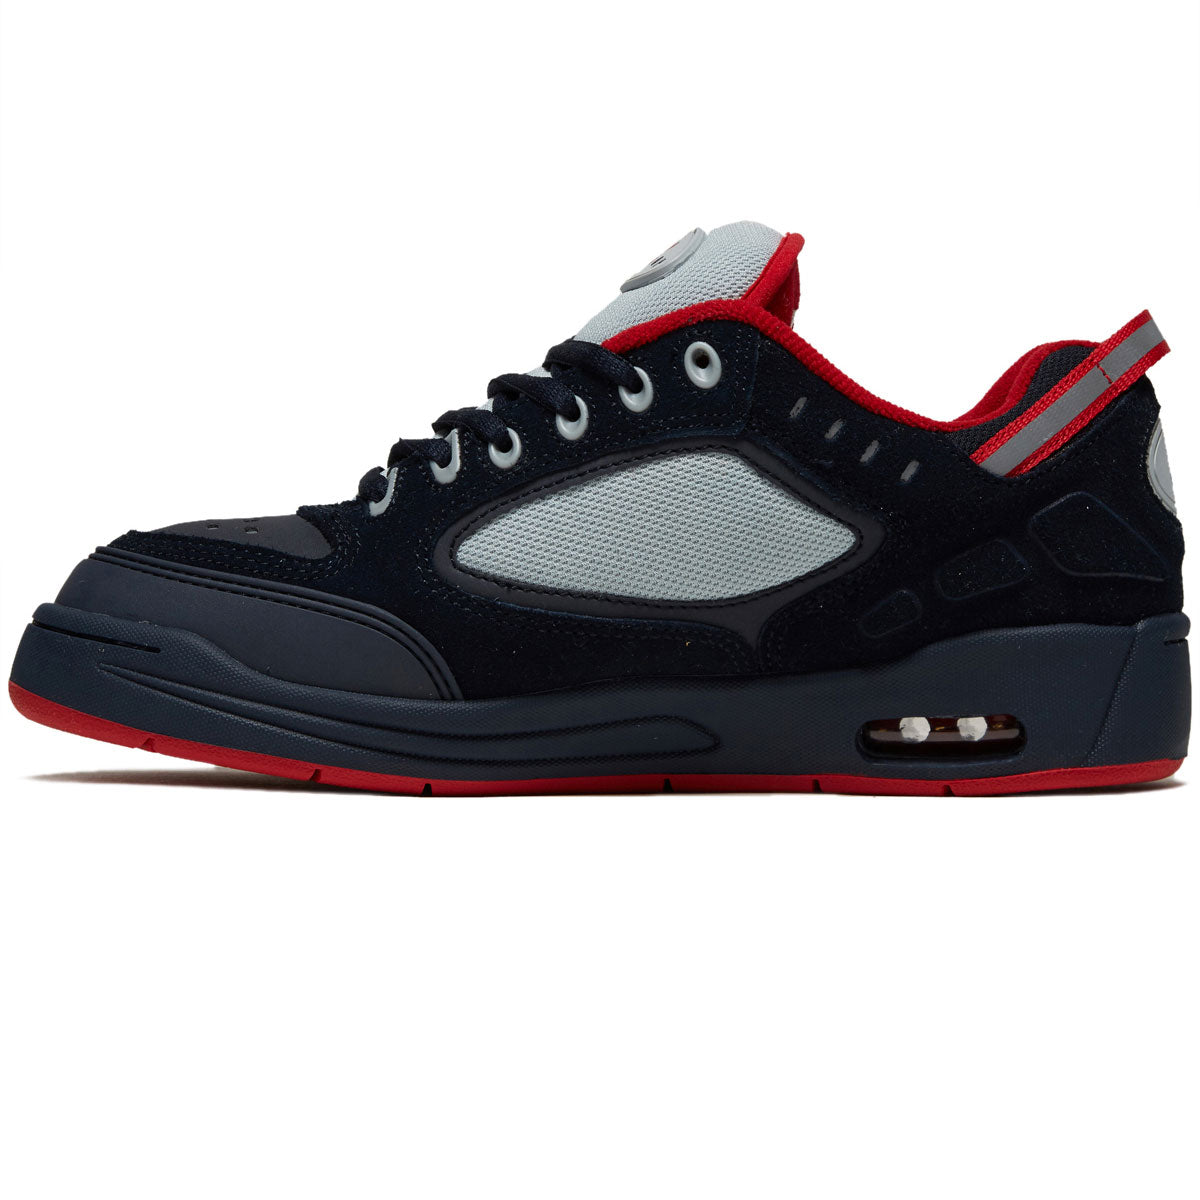 eS Creager Shoes - Navy/Grey/Red image 2